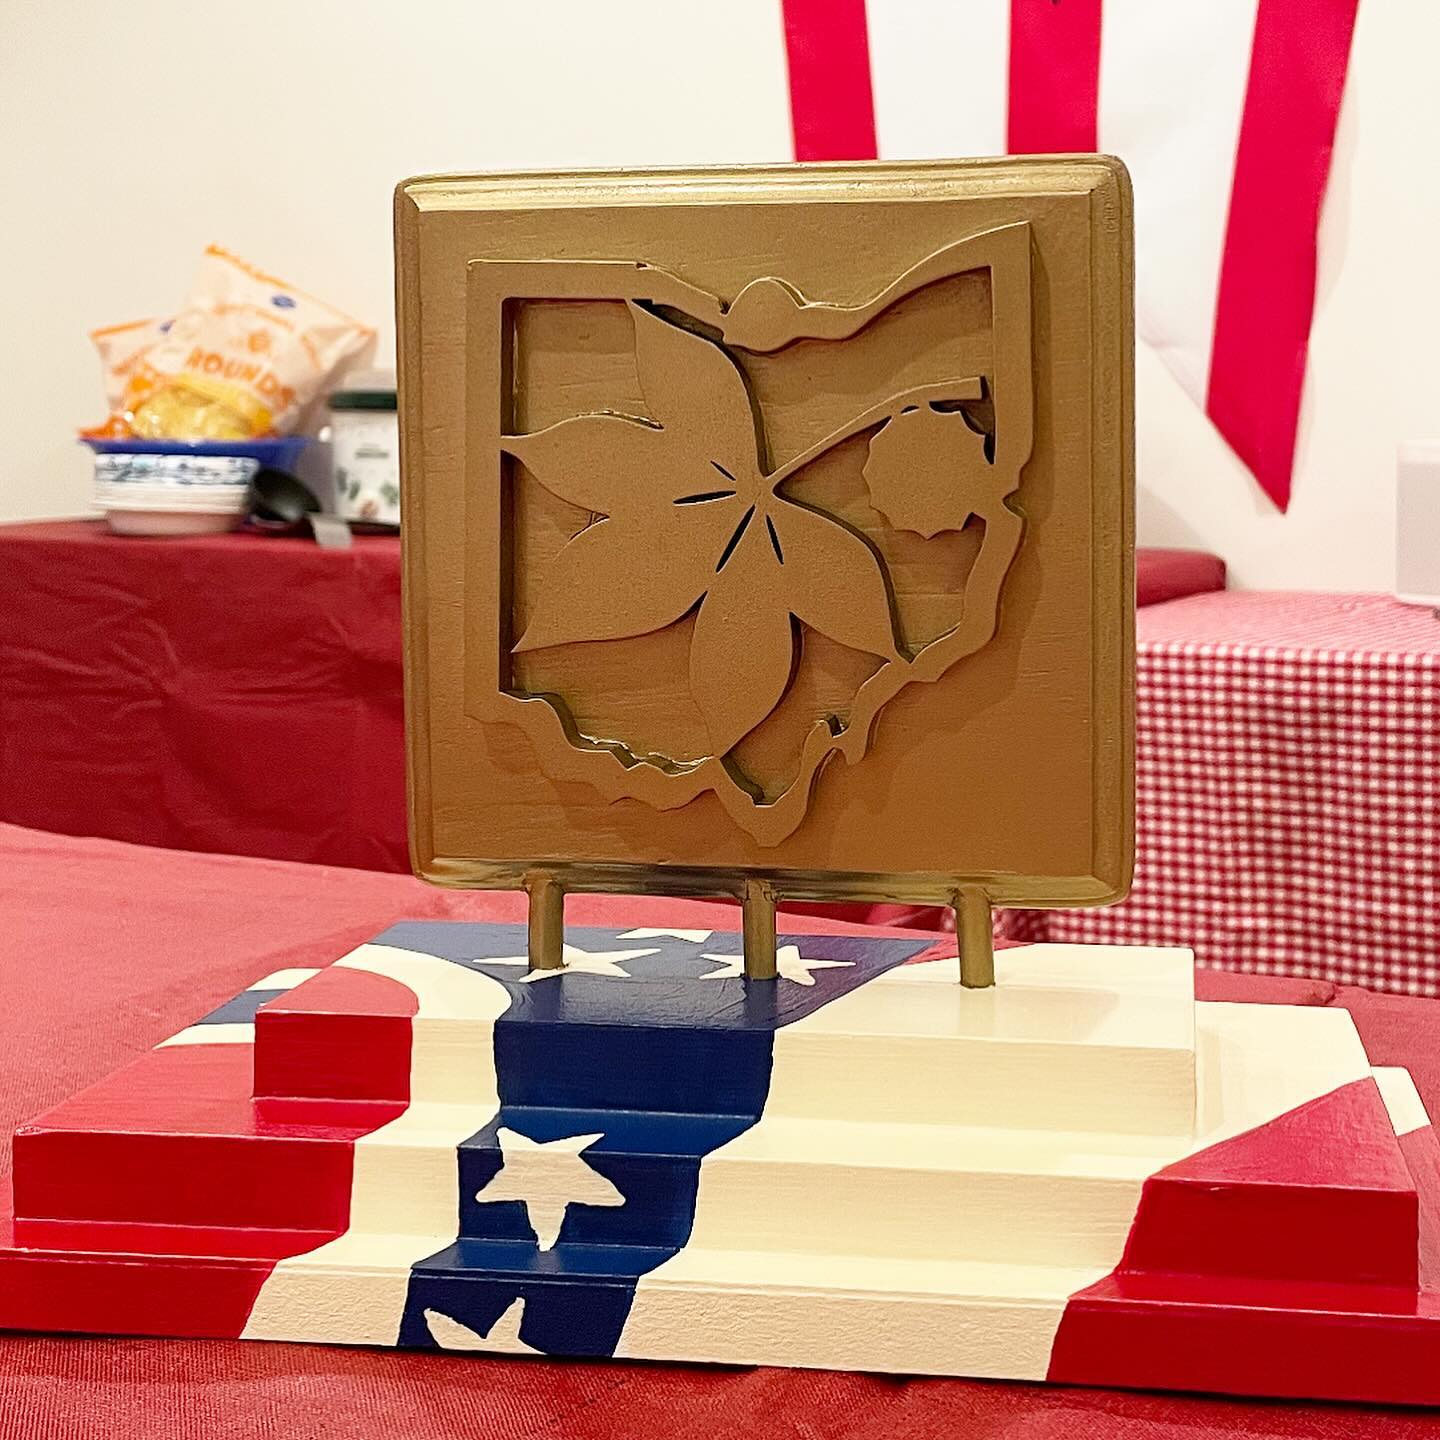 The Bronze Buckeye!
We had as much fun watching someone win it as we did creating it. ️️️️

Try to win it in March 2025 for our 2nd Annual Ohio Statehood Day Party.